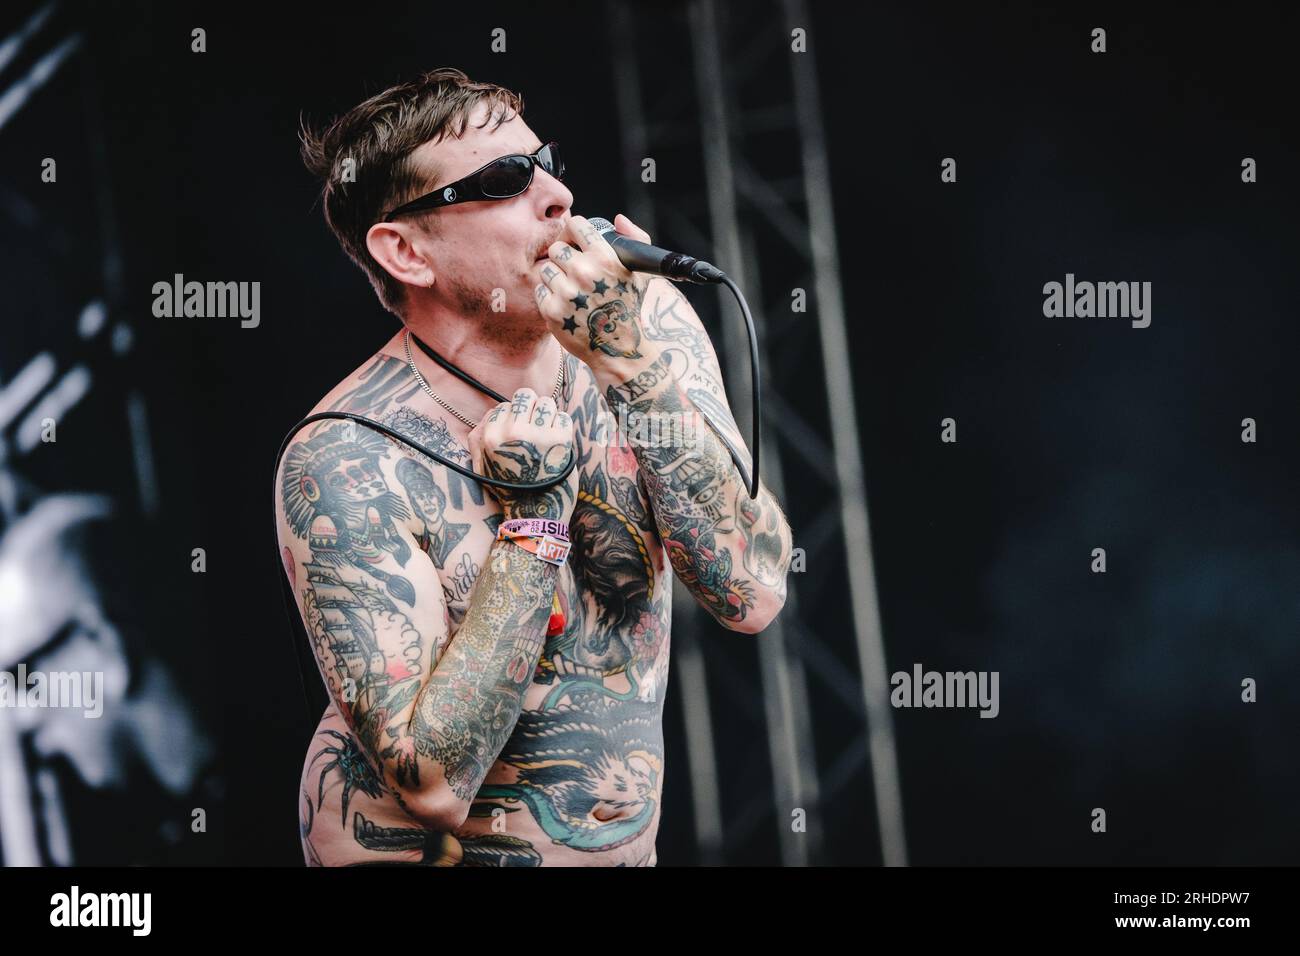 Gothenburg, Sweden. 12th, August 2023. The Swedish punk band Viagra Boys performs a live concert during the Swedish music festival Way Out West 2023 in Gothenburg. Here vocalist Sebastian Murphy is seen live on stage. (Photo credit: Gonzales Photo - Tilman Jentzsch). Stock Photo